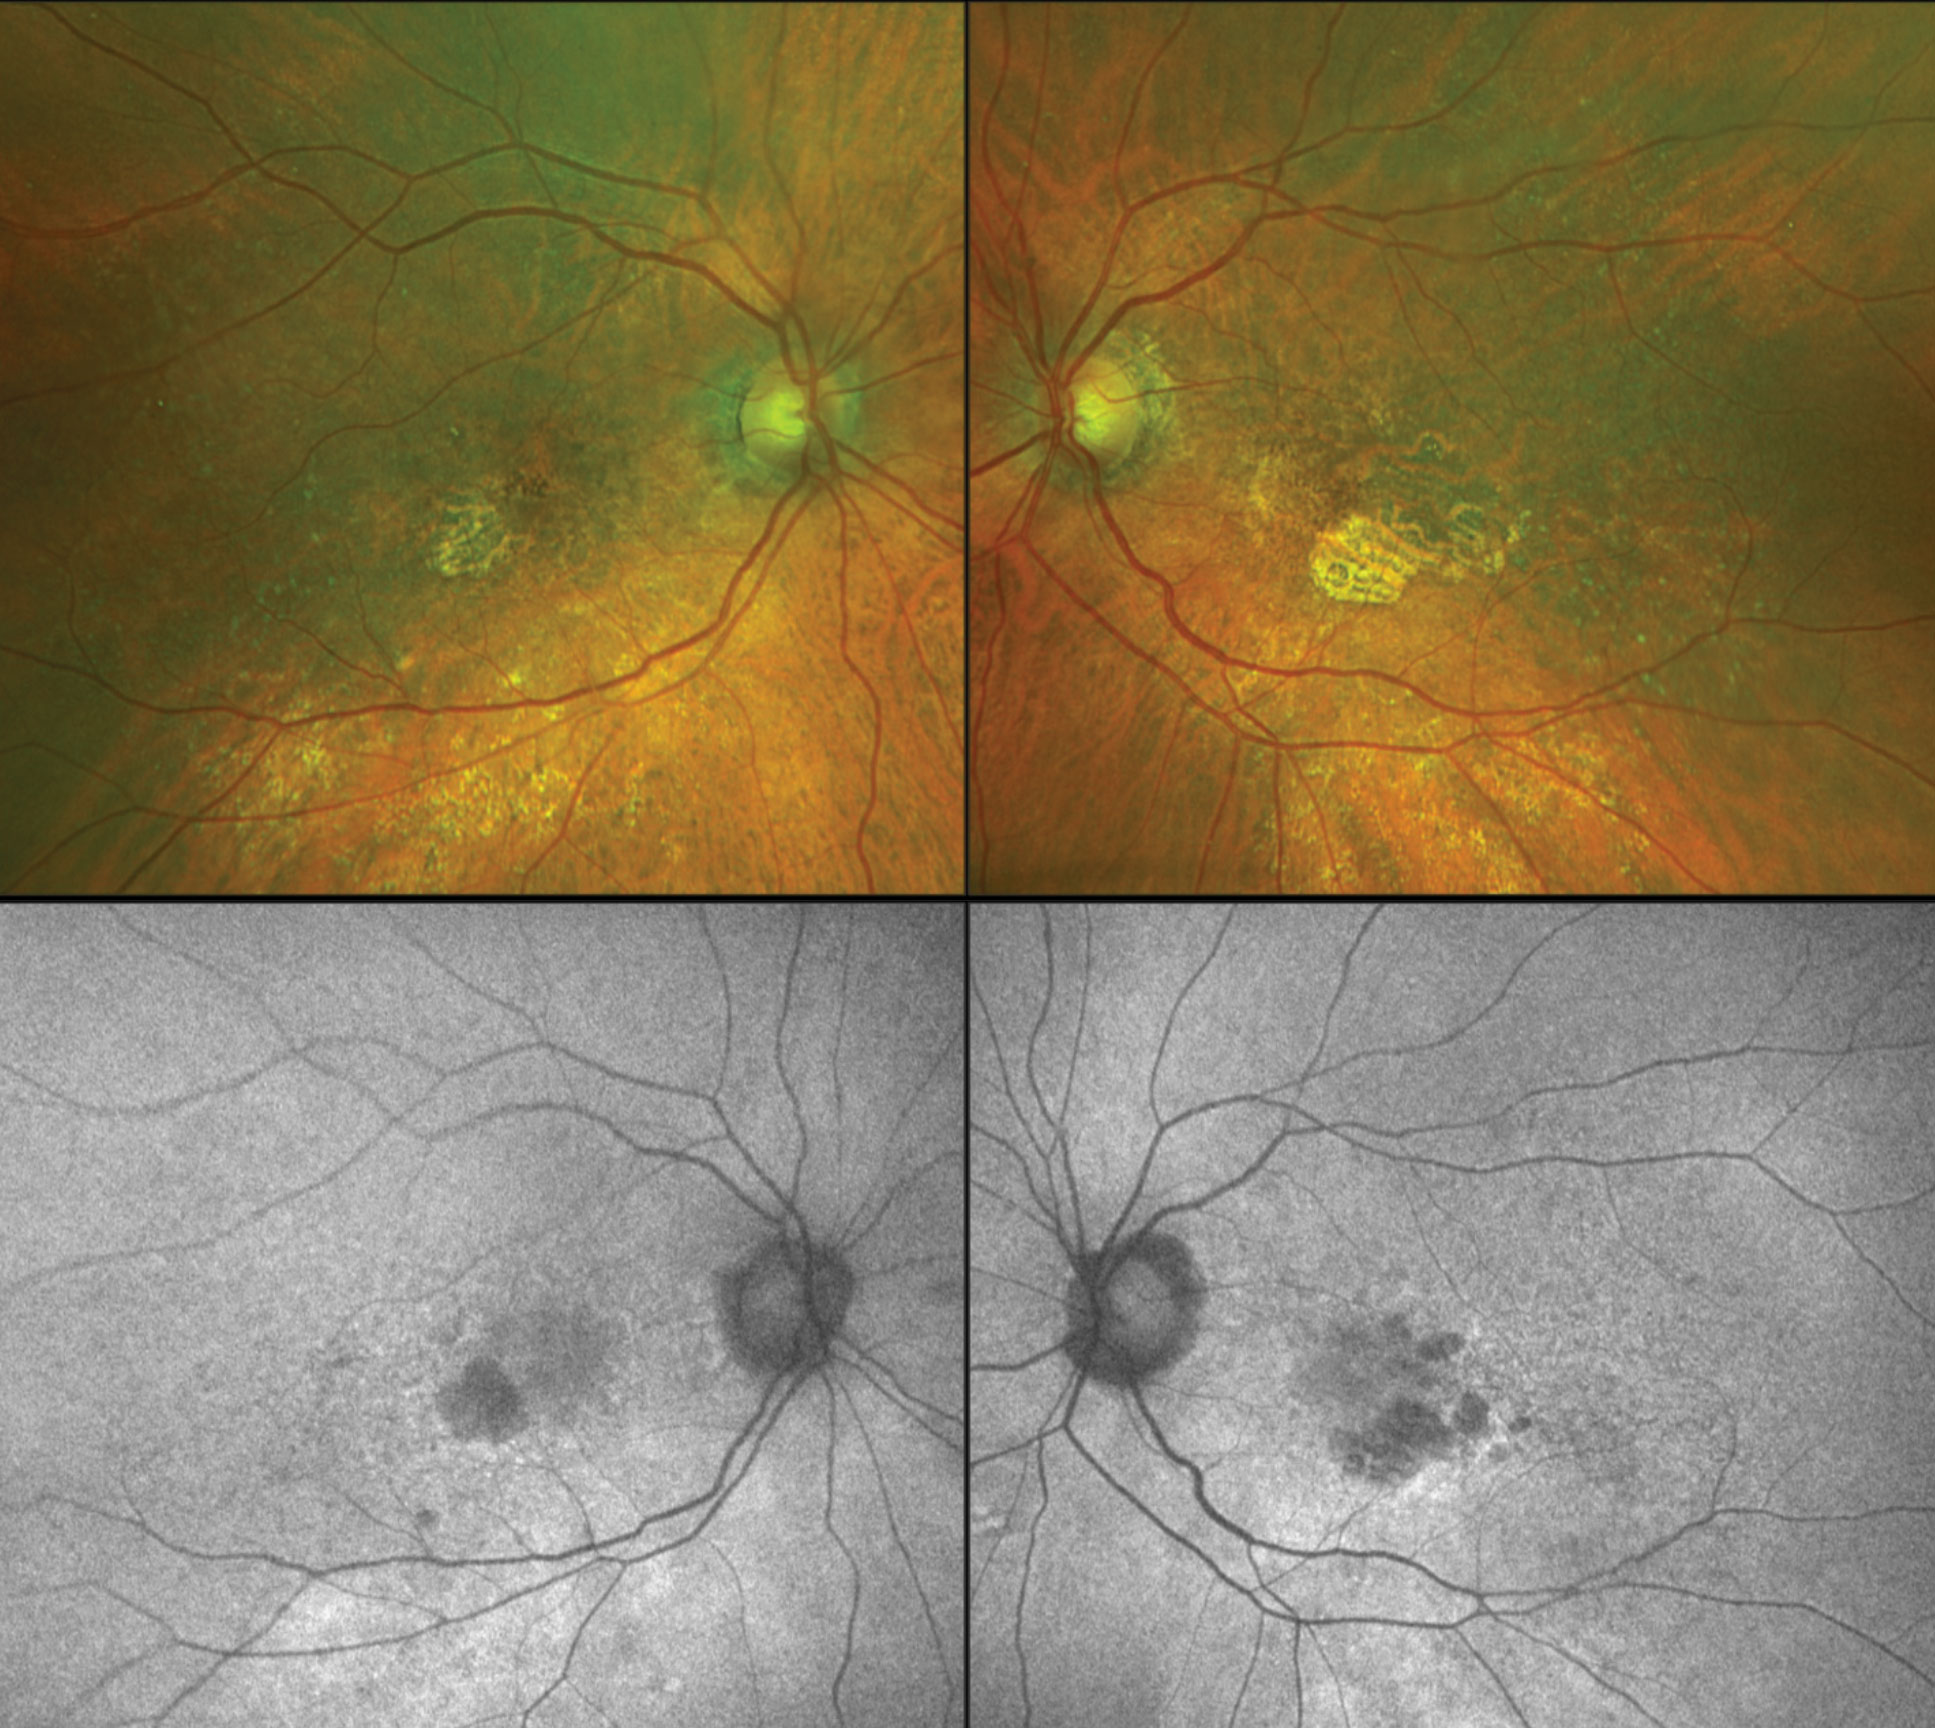 : A new form of autofluorescence imaging was able to differentiate two potential disease pathways in geographic atrophy, originating from intermediate AMD lesions, to help simplify and aid research.